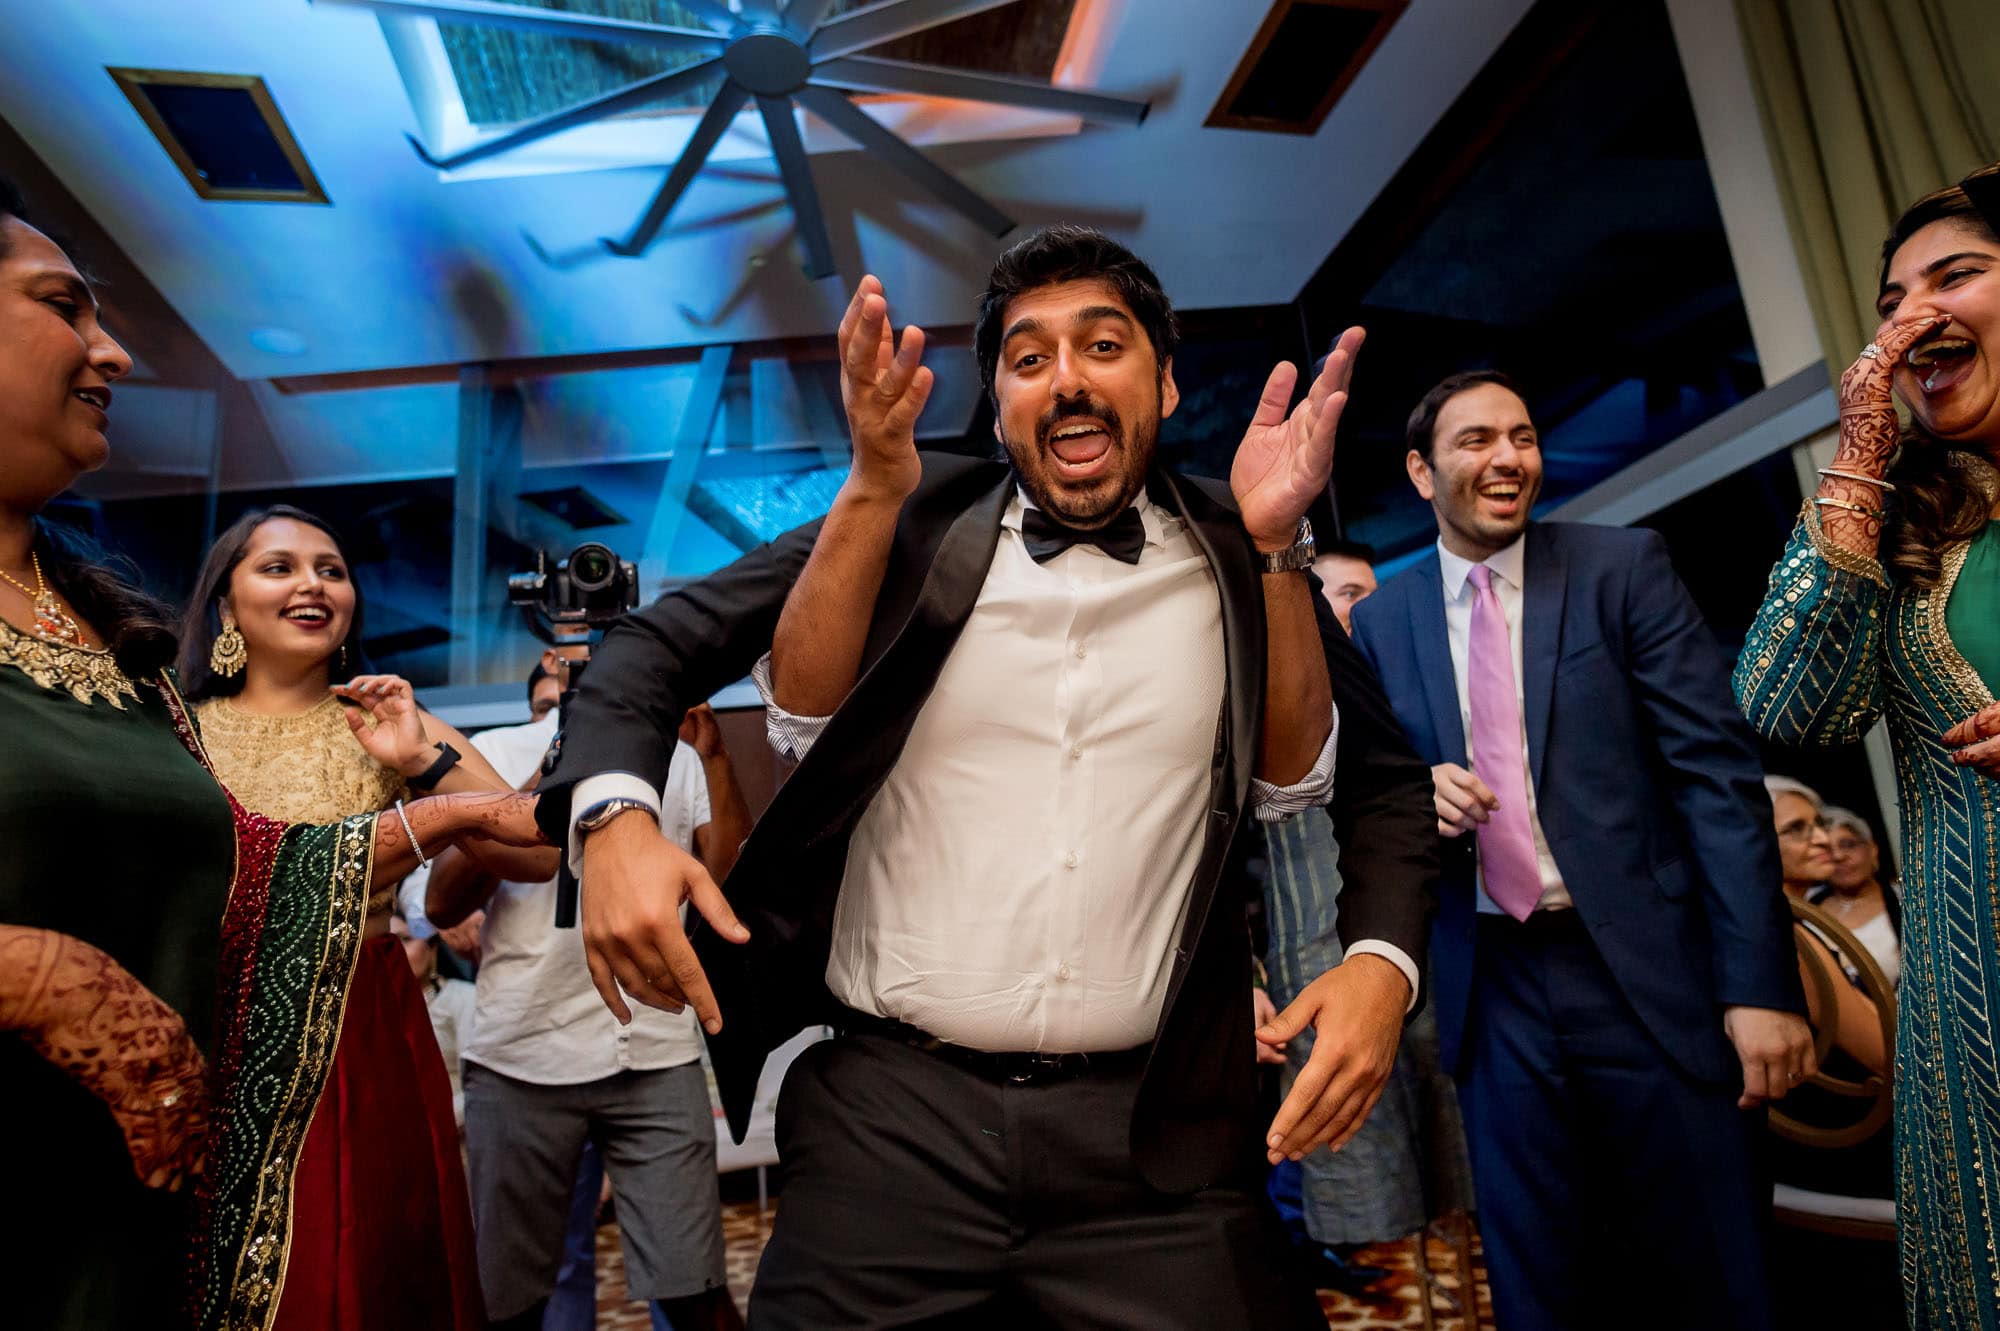 Ripping up the dance floor at this not so traditional Hindu Muslim wedding reception